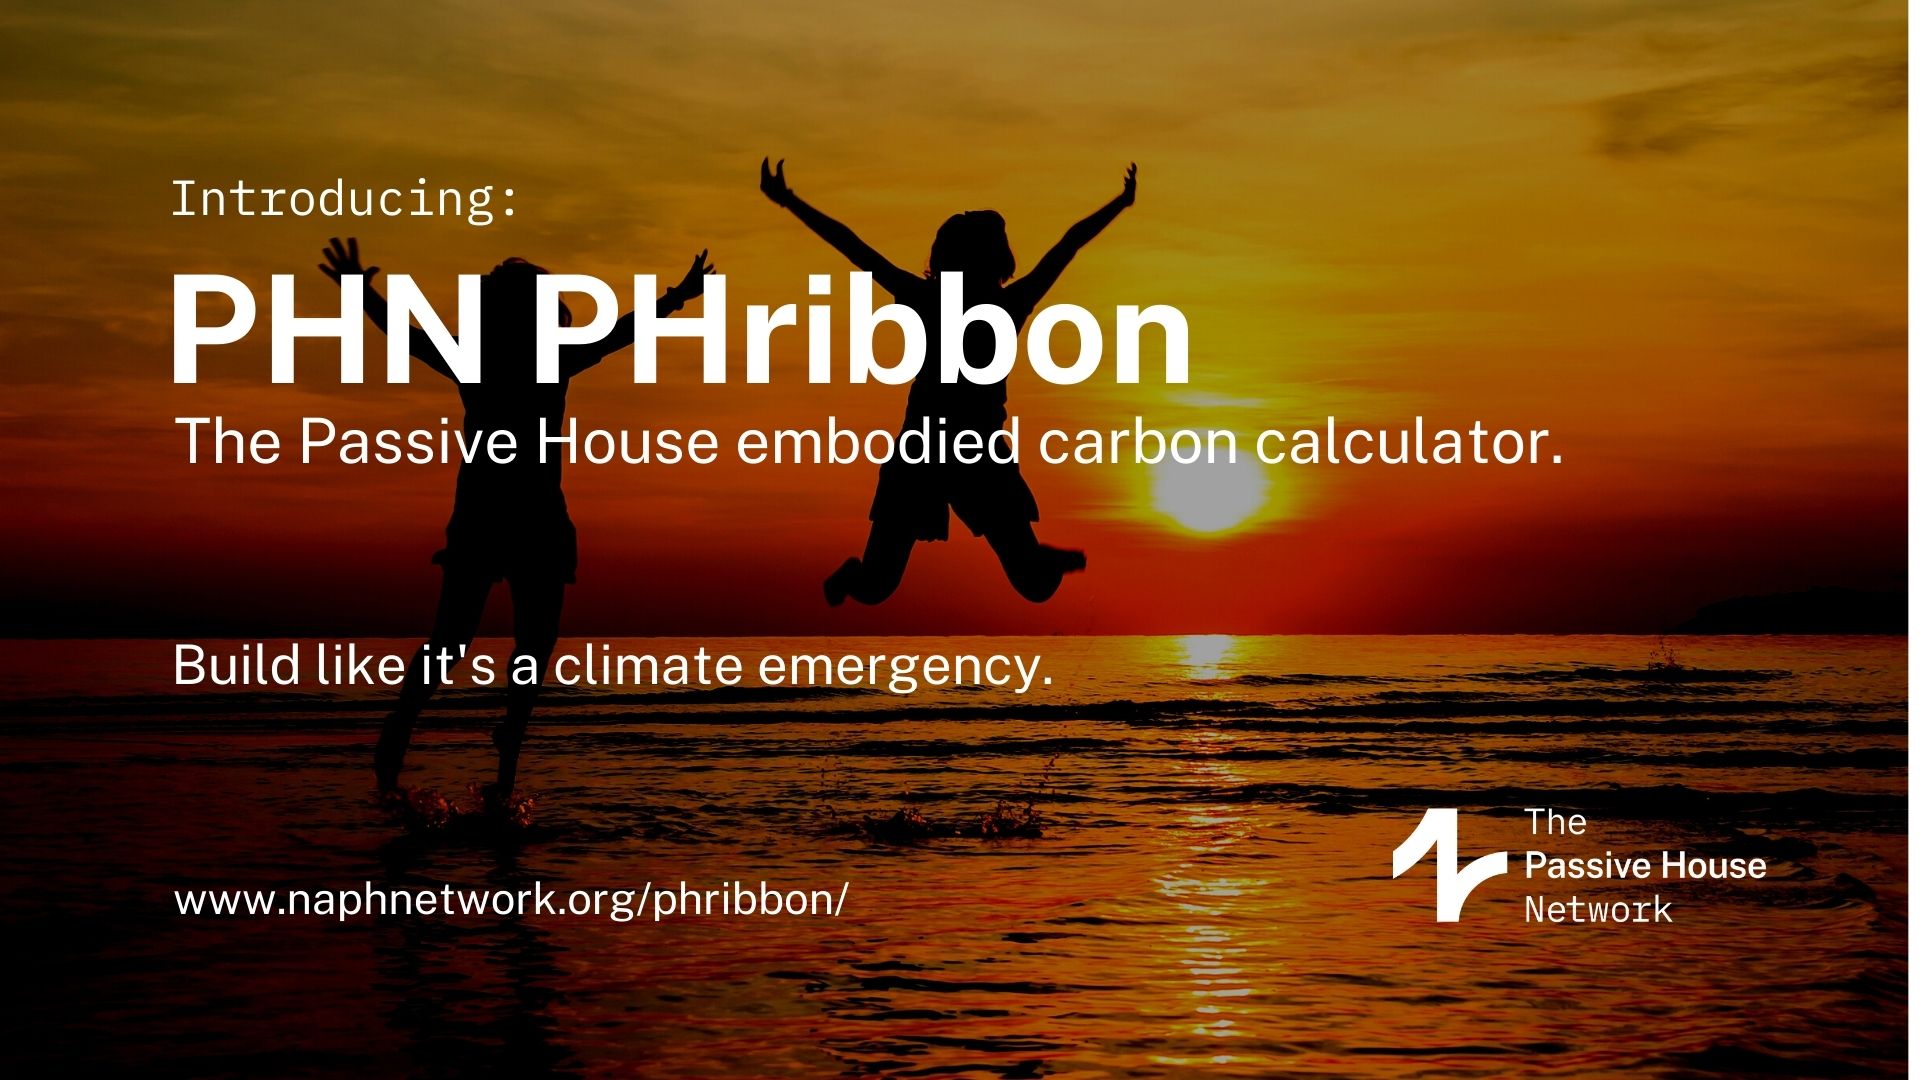 Announcing the Passive House Network PHribbon: A National Building Carbon Emissions Tool